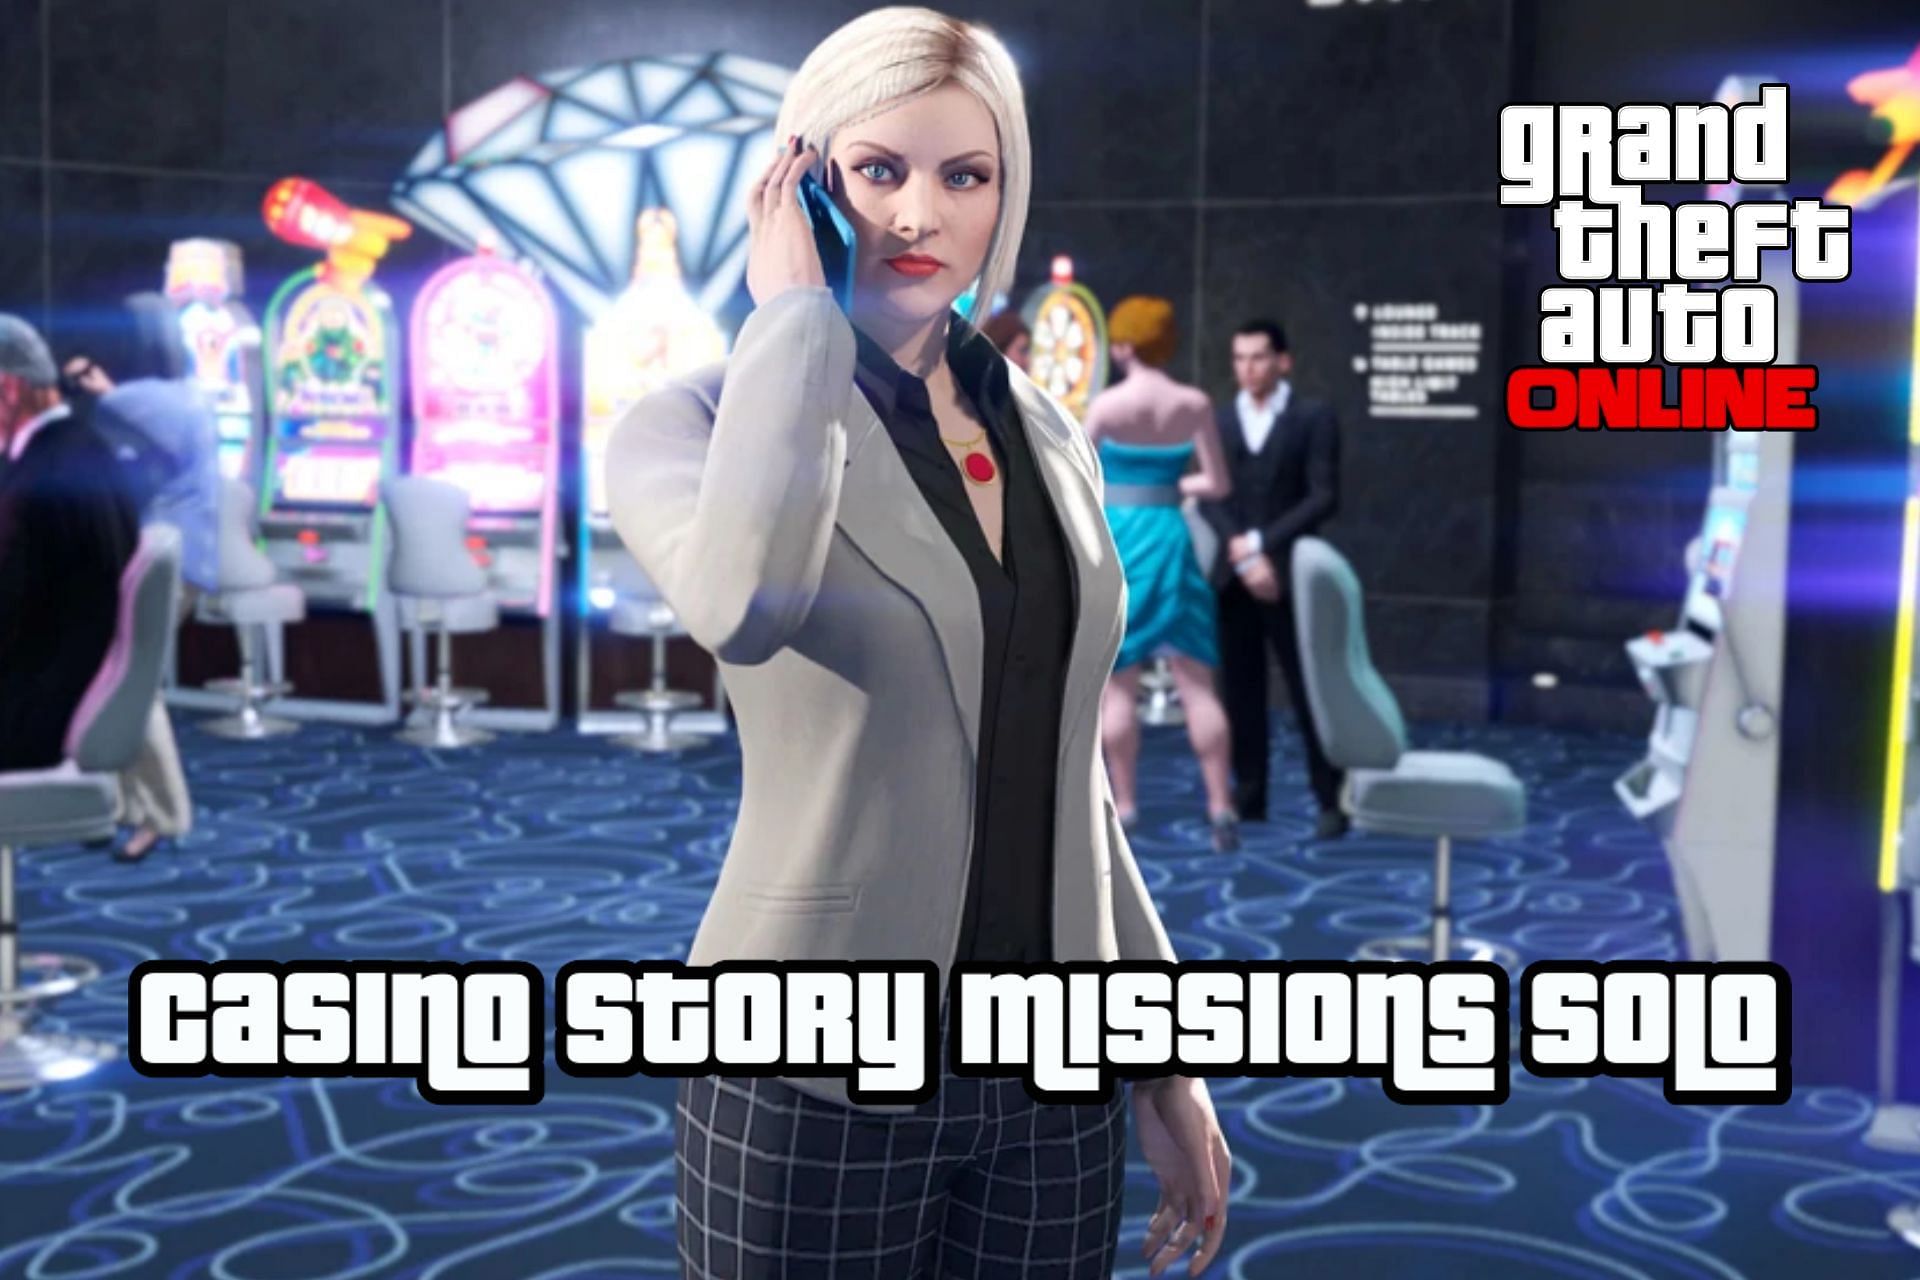 GTA Online players can now complete the Casino Story Missions solo (Image via Rockstar Games)